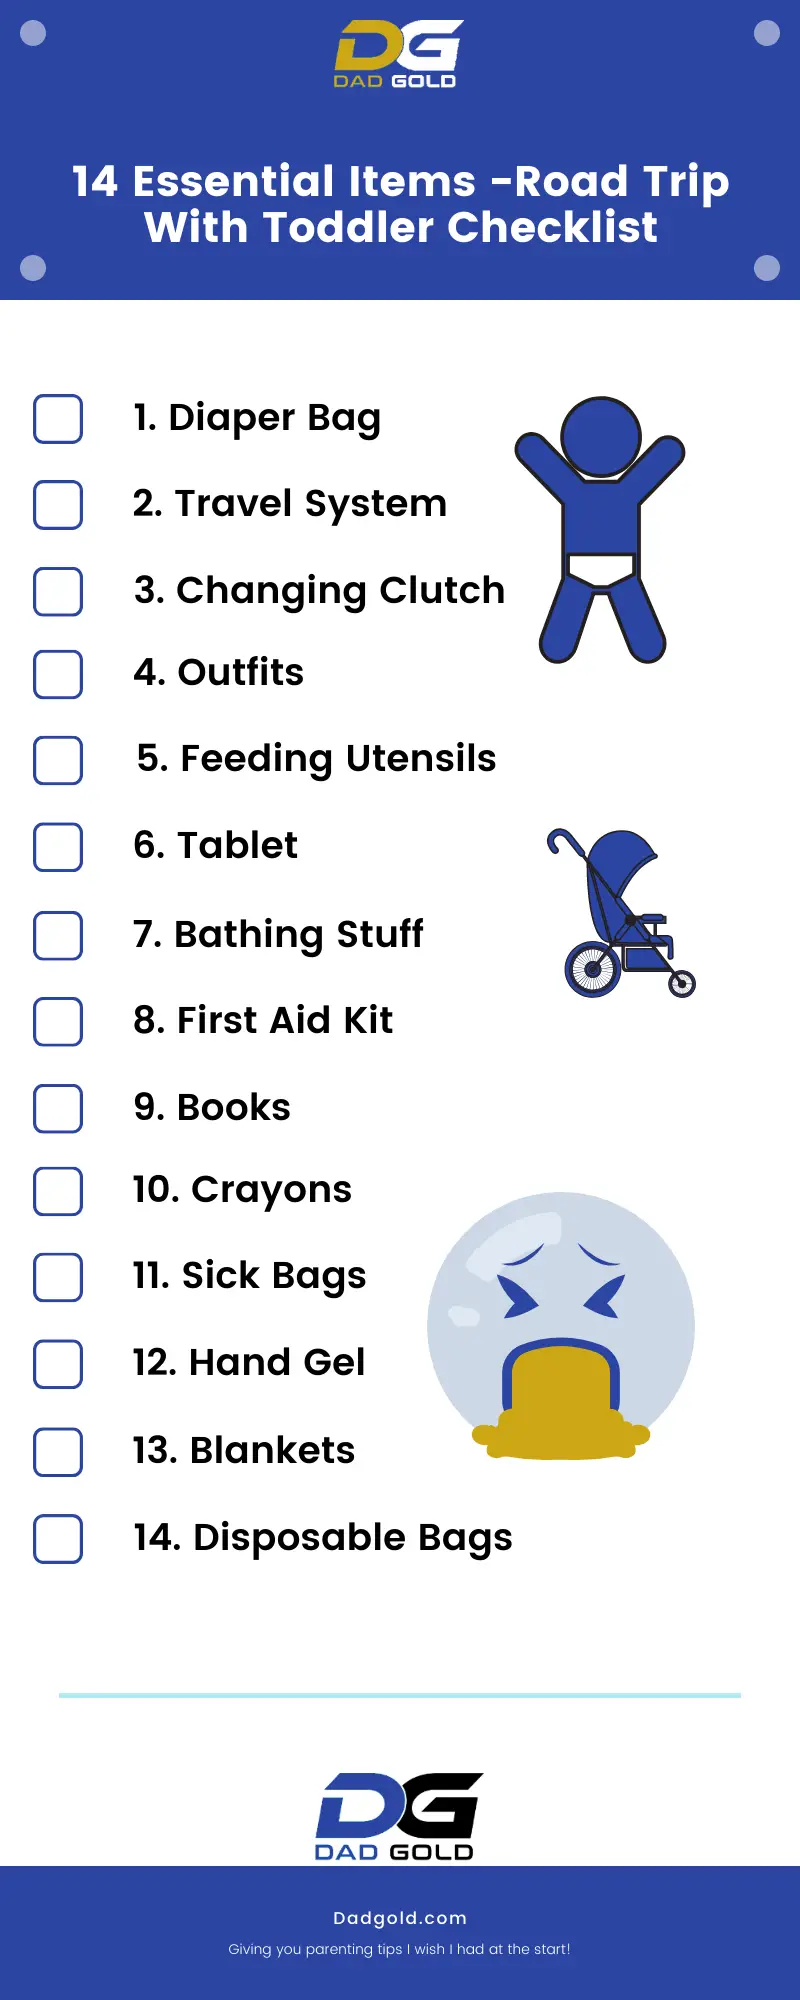 14 Essential Items -Road Trip With Toddler Checklist Infographic